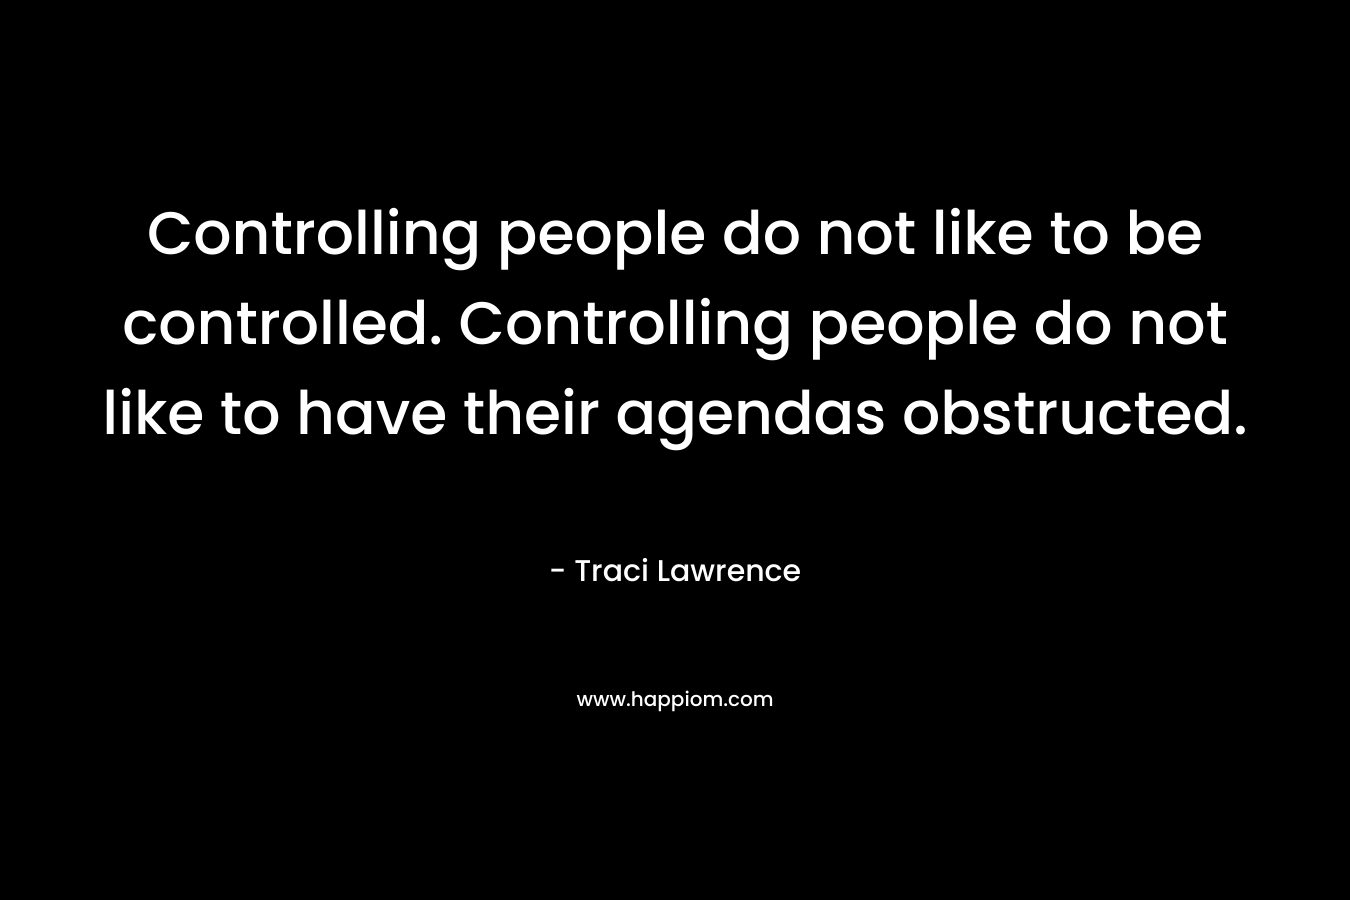 Controlling people do not like to be controlled. Controlling people do not like to have their agendas obstructed. – Traci Lawrence